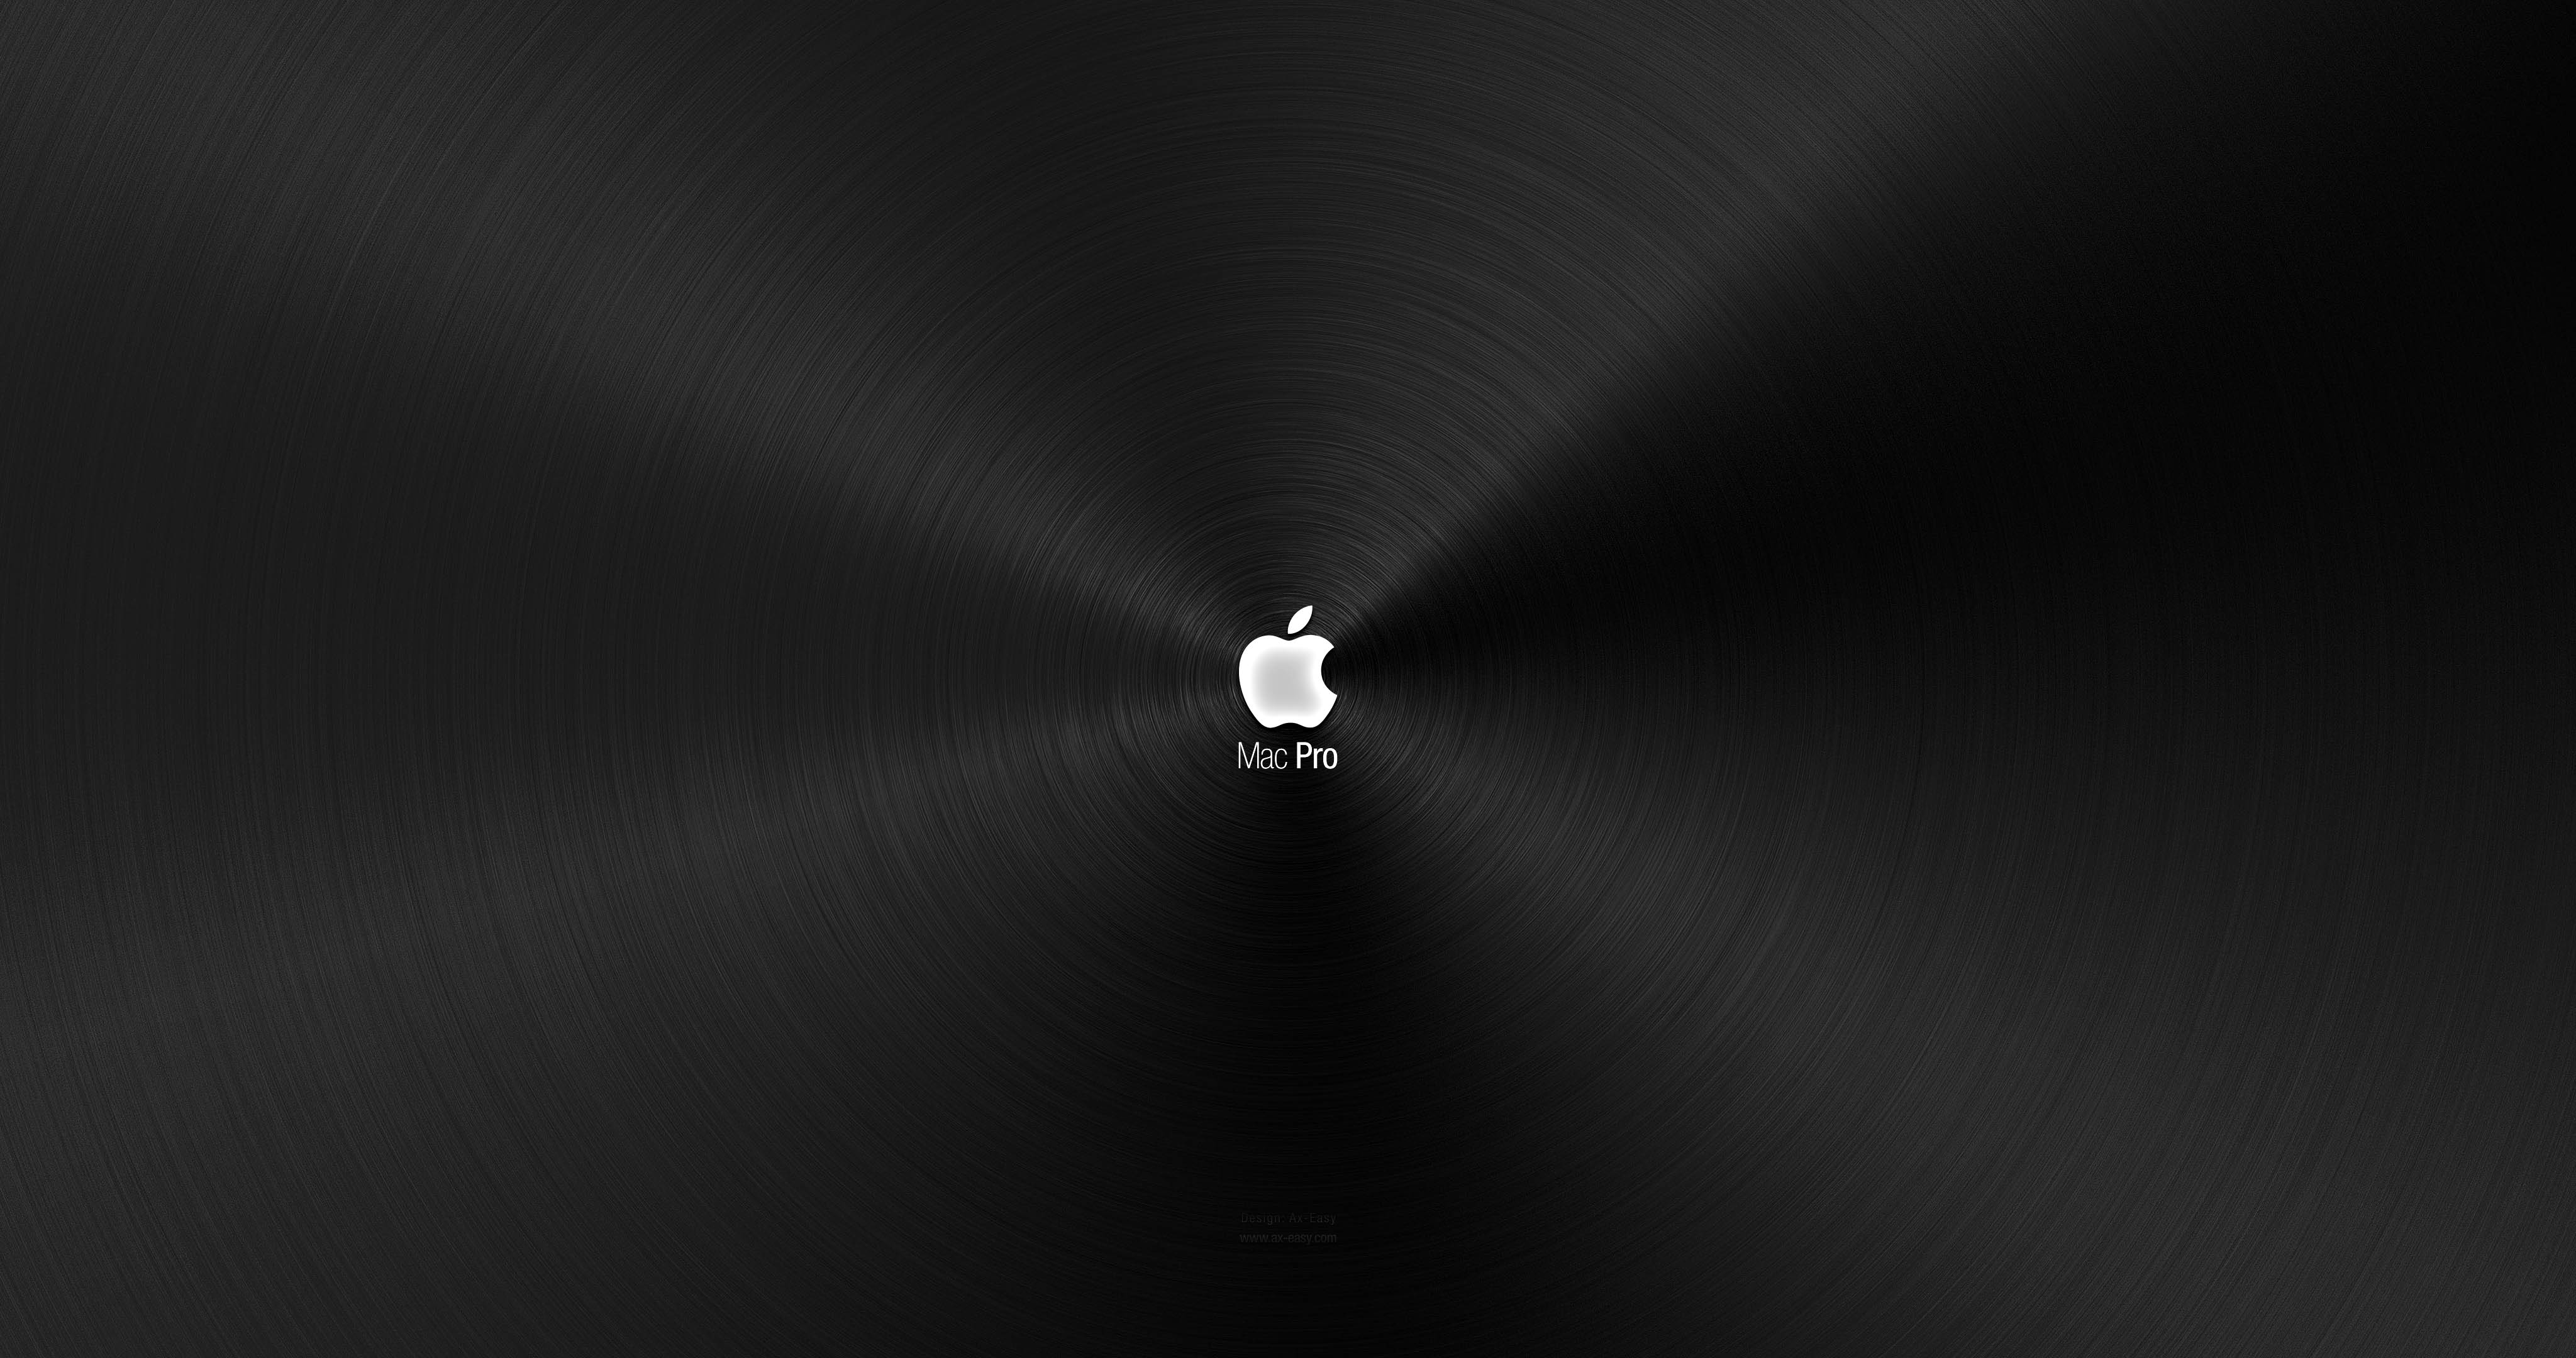 Wallpapers For Mac Pro